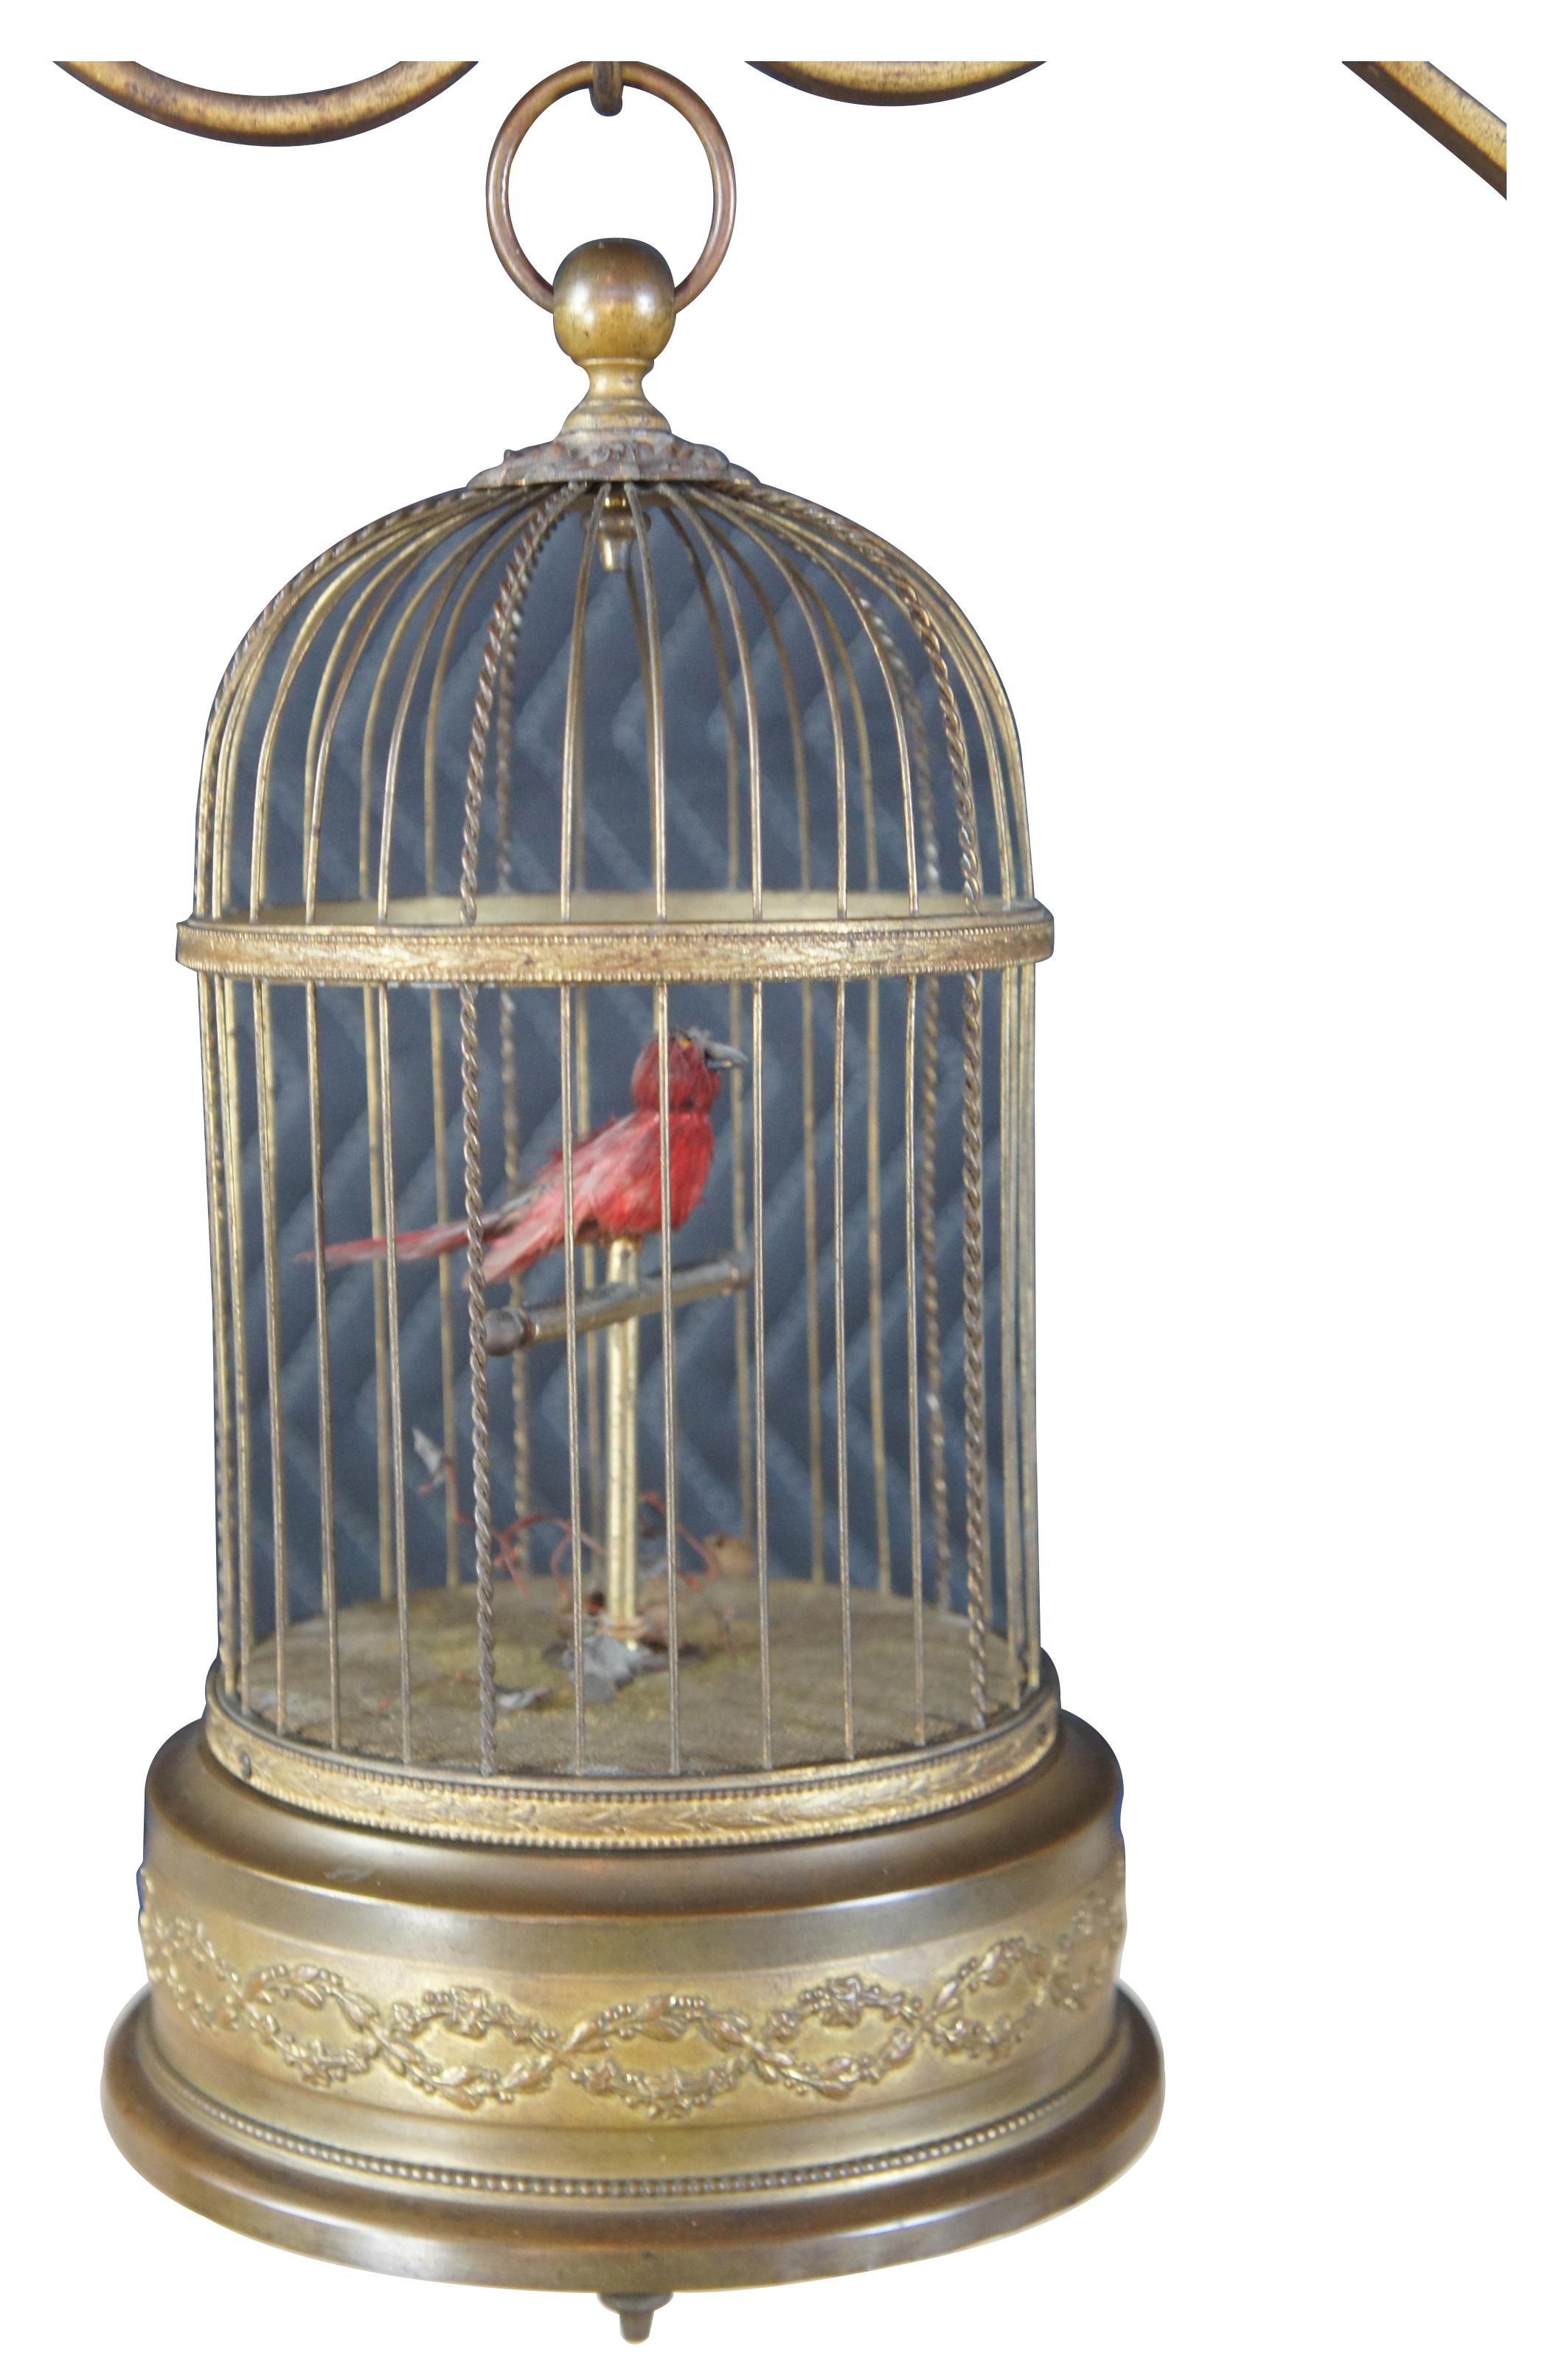 Antique automation music box bird cage and stand. The birdcage is made of brass with a neoclassical motif of a wreath surrounding the base. The stand is made of scrolled brass and wrought iron with a floral finial. The song bird moves and turns when